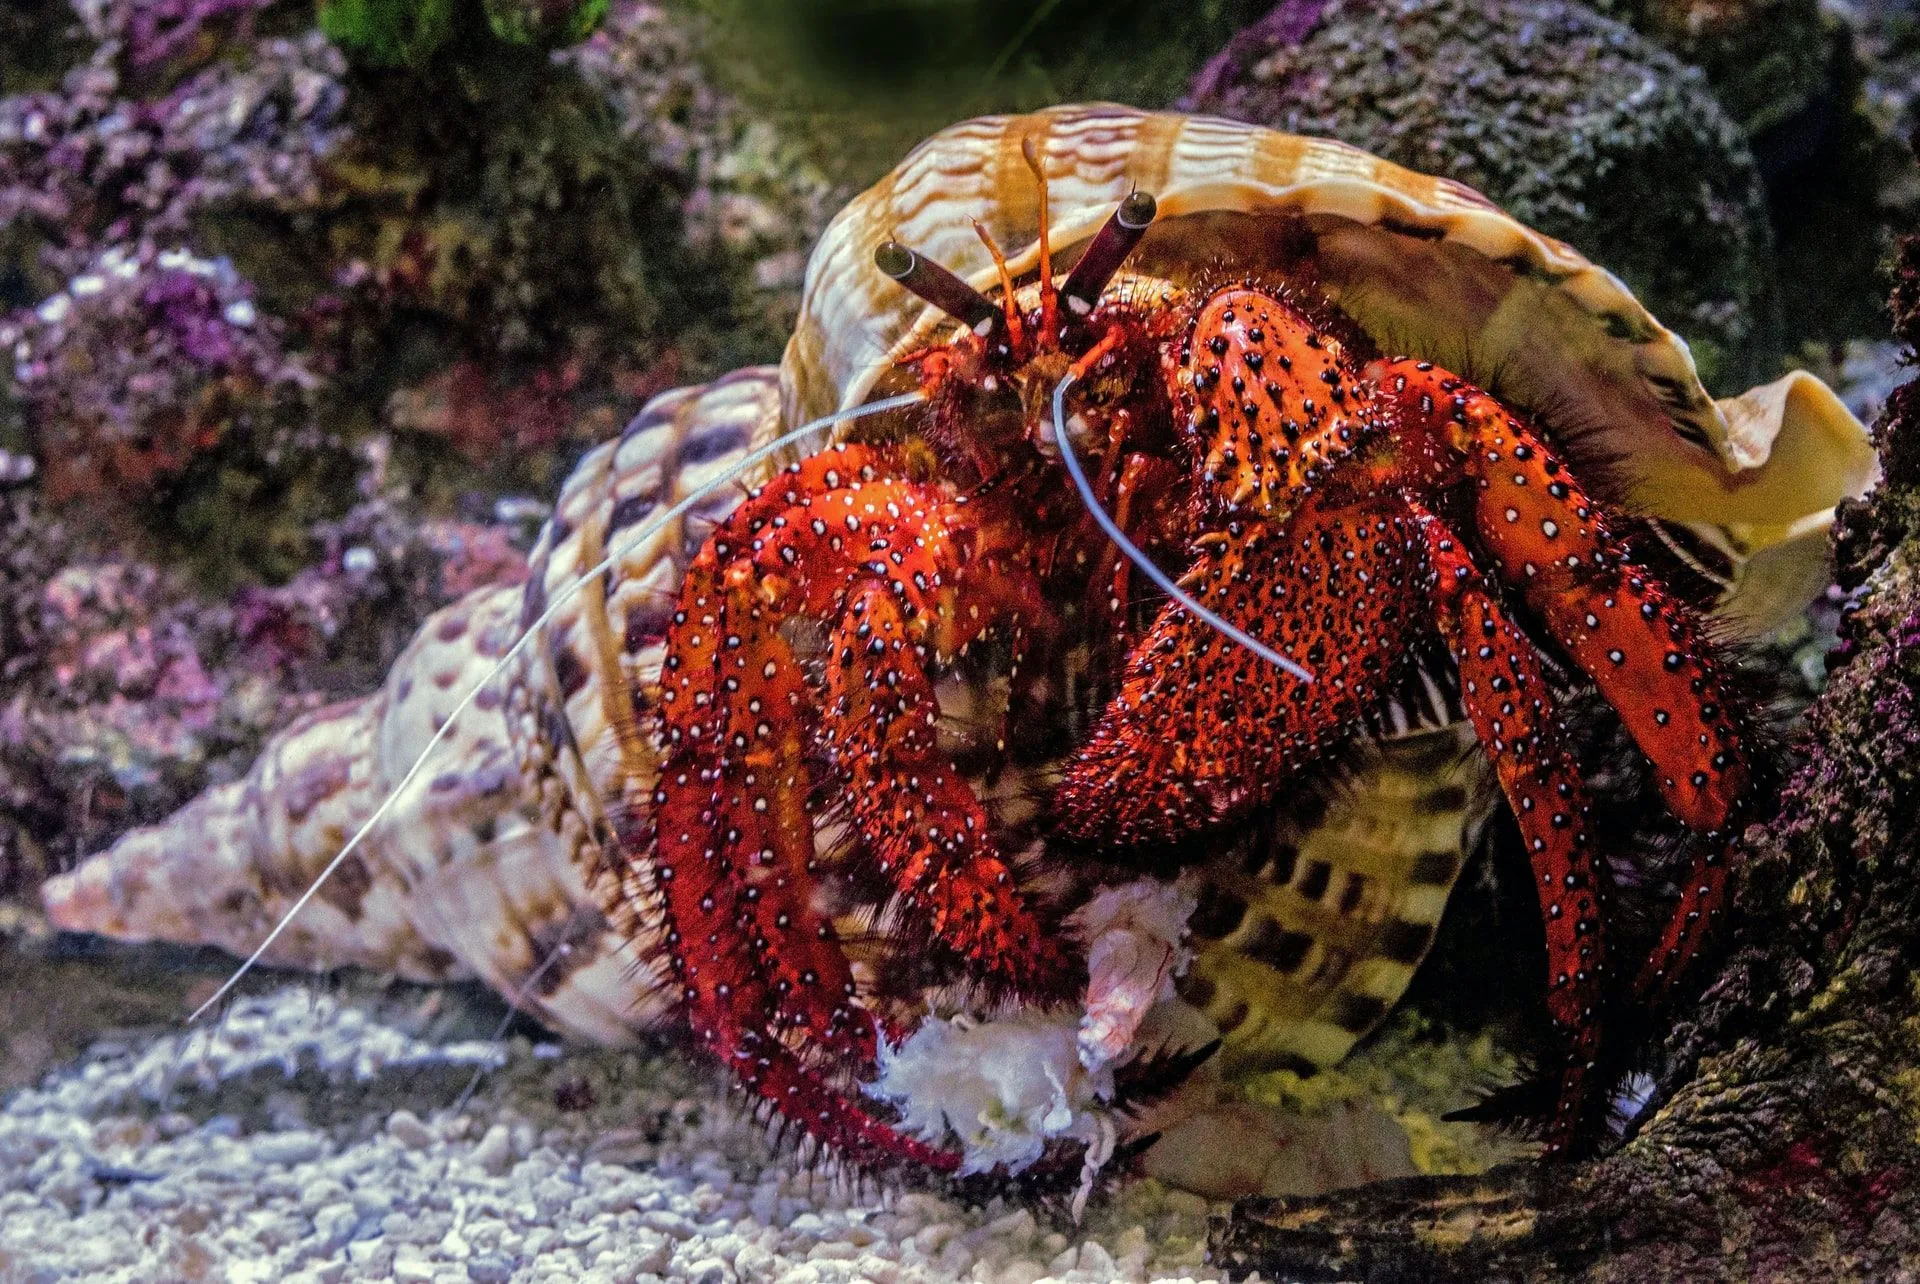 Discover good hermit crab names for your new pet.